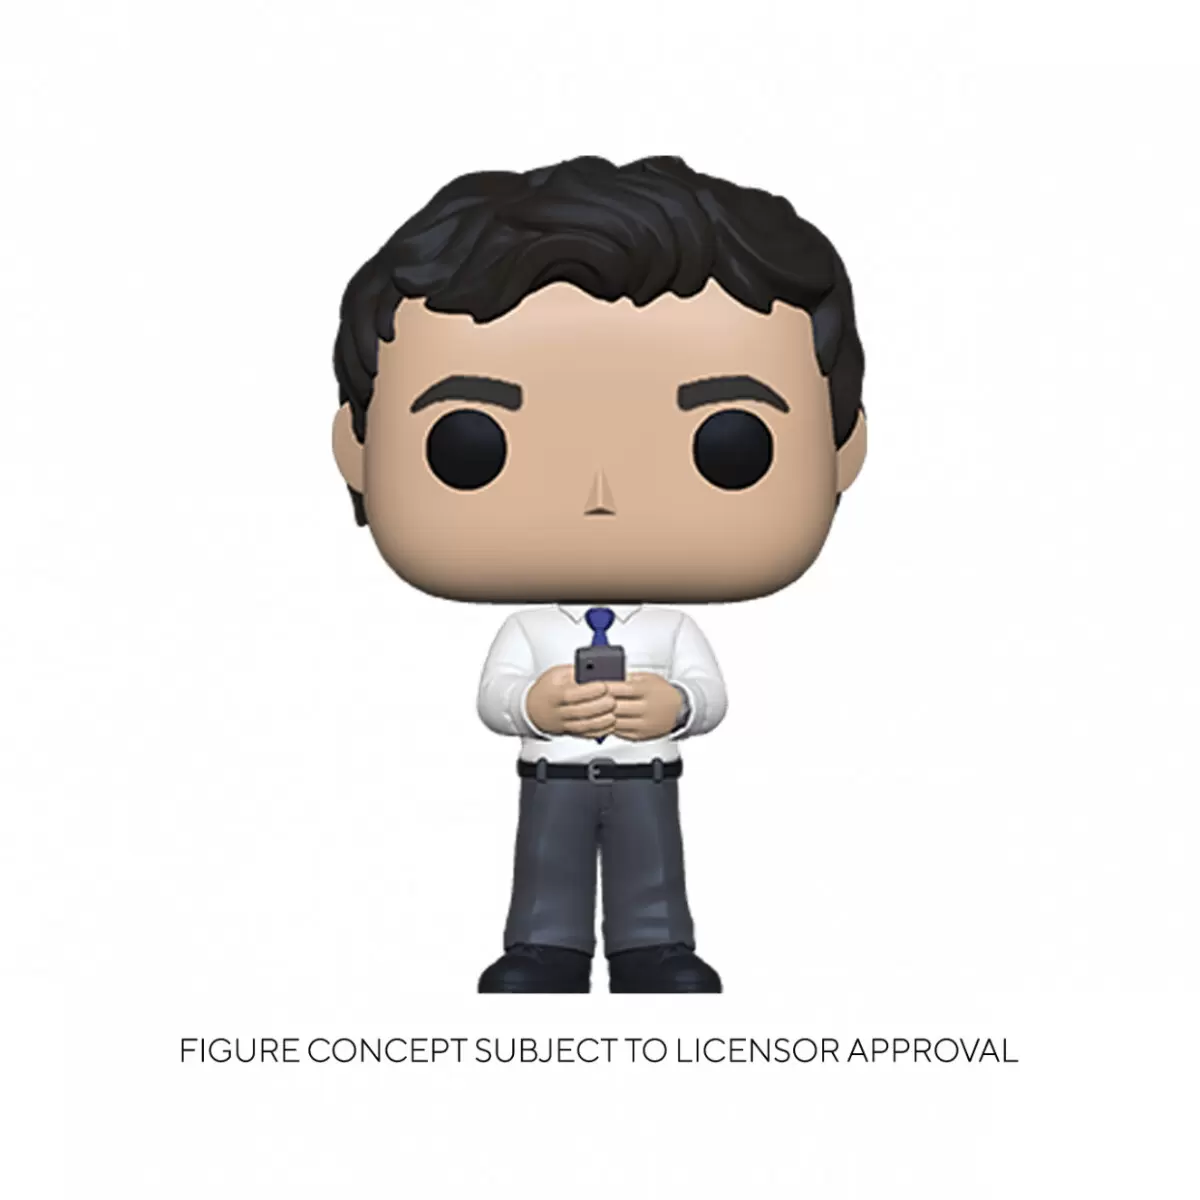 POP! Television - The Office - Ryan